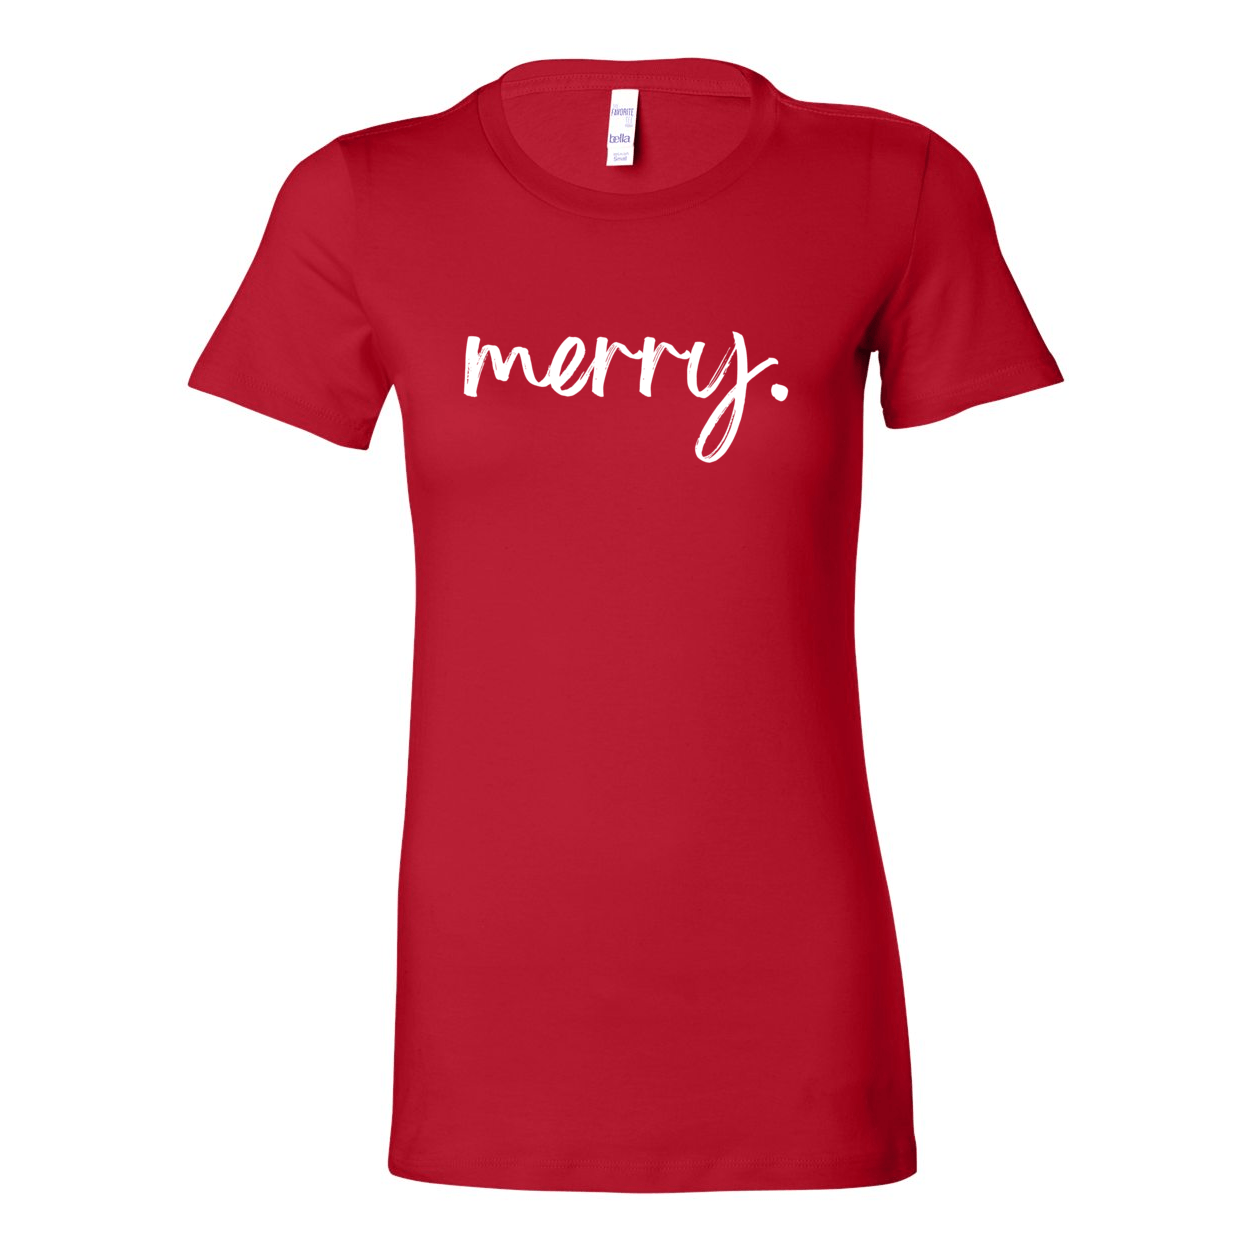 Merry White Graphic Women's The Favorite Tee - The Kindness Cause